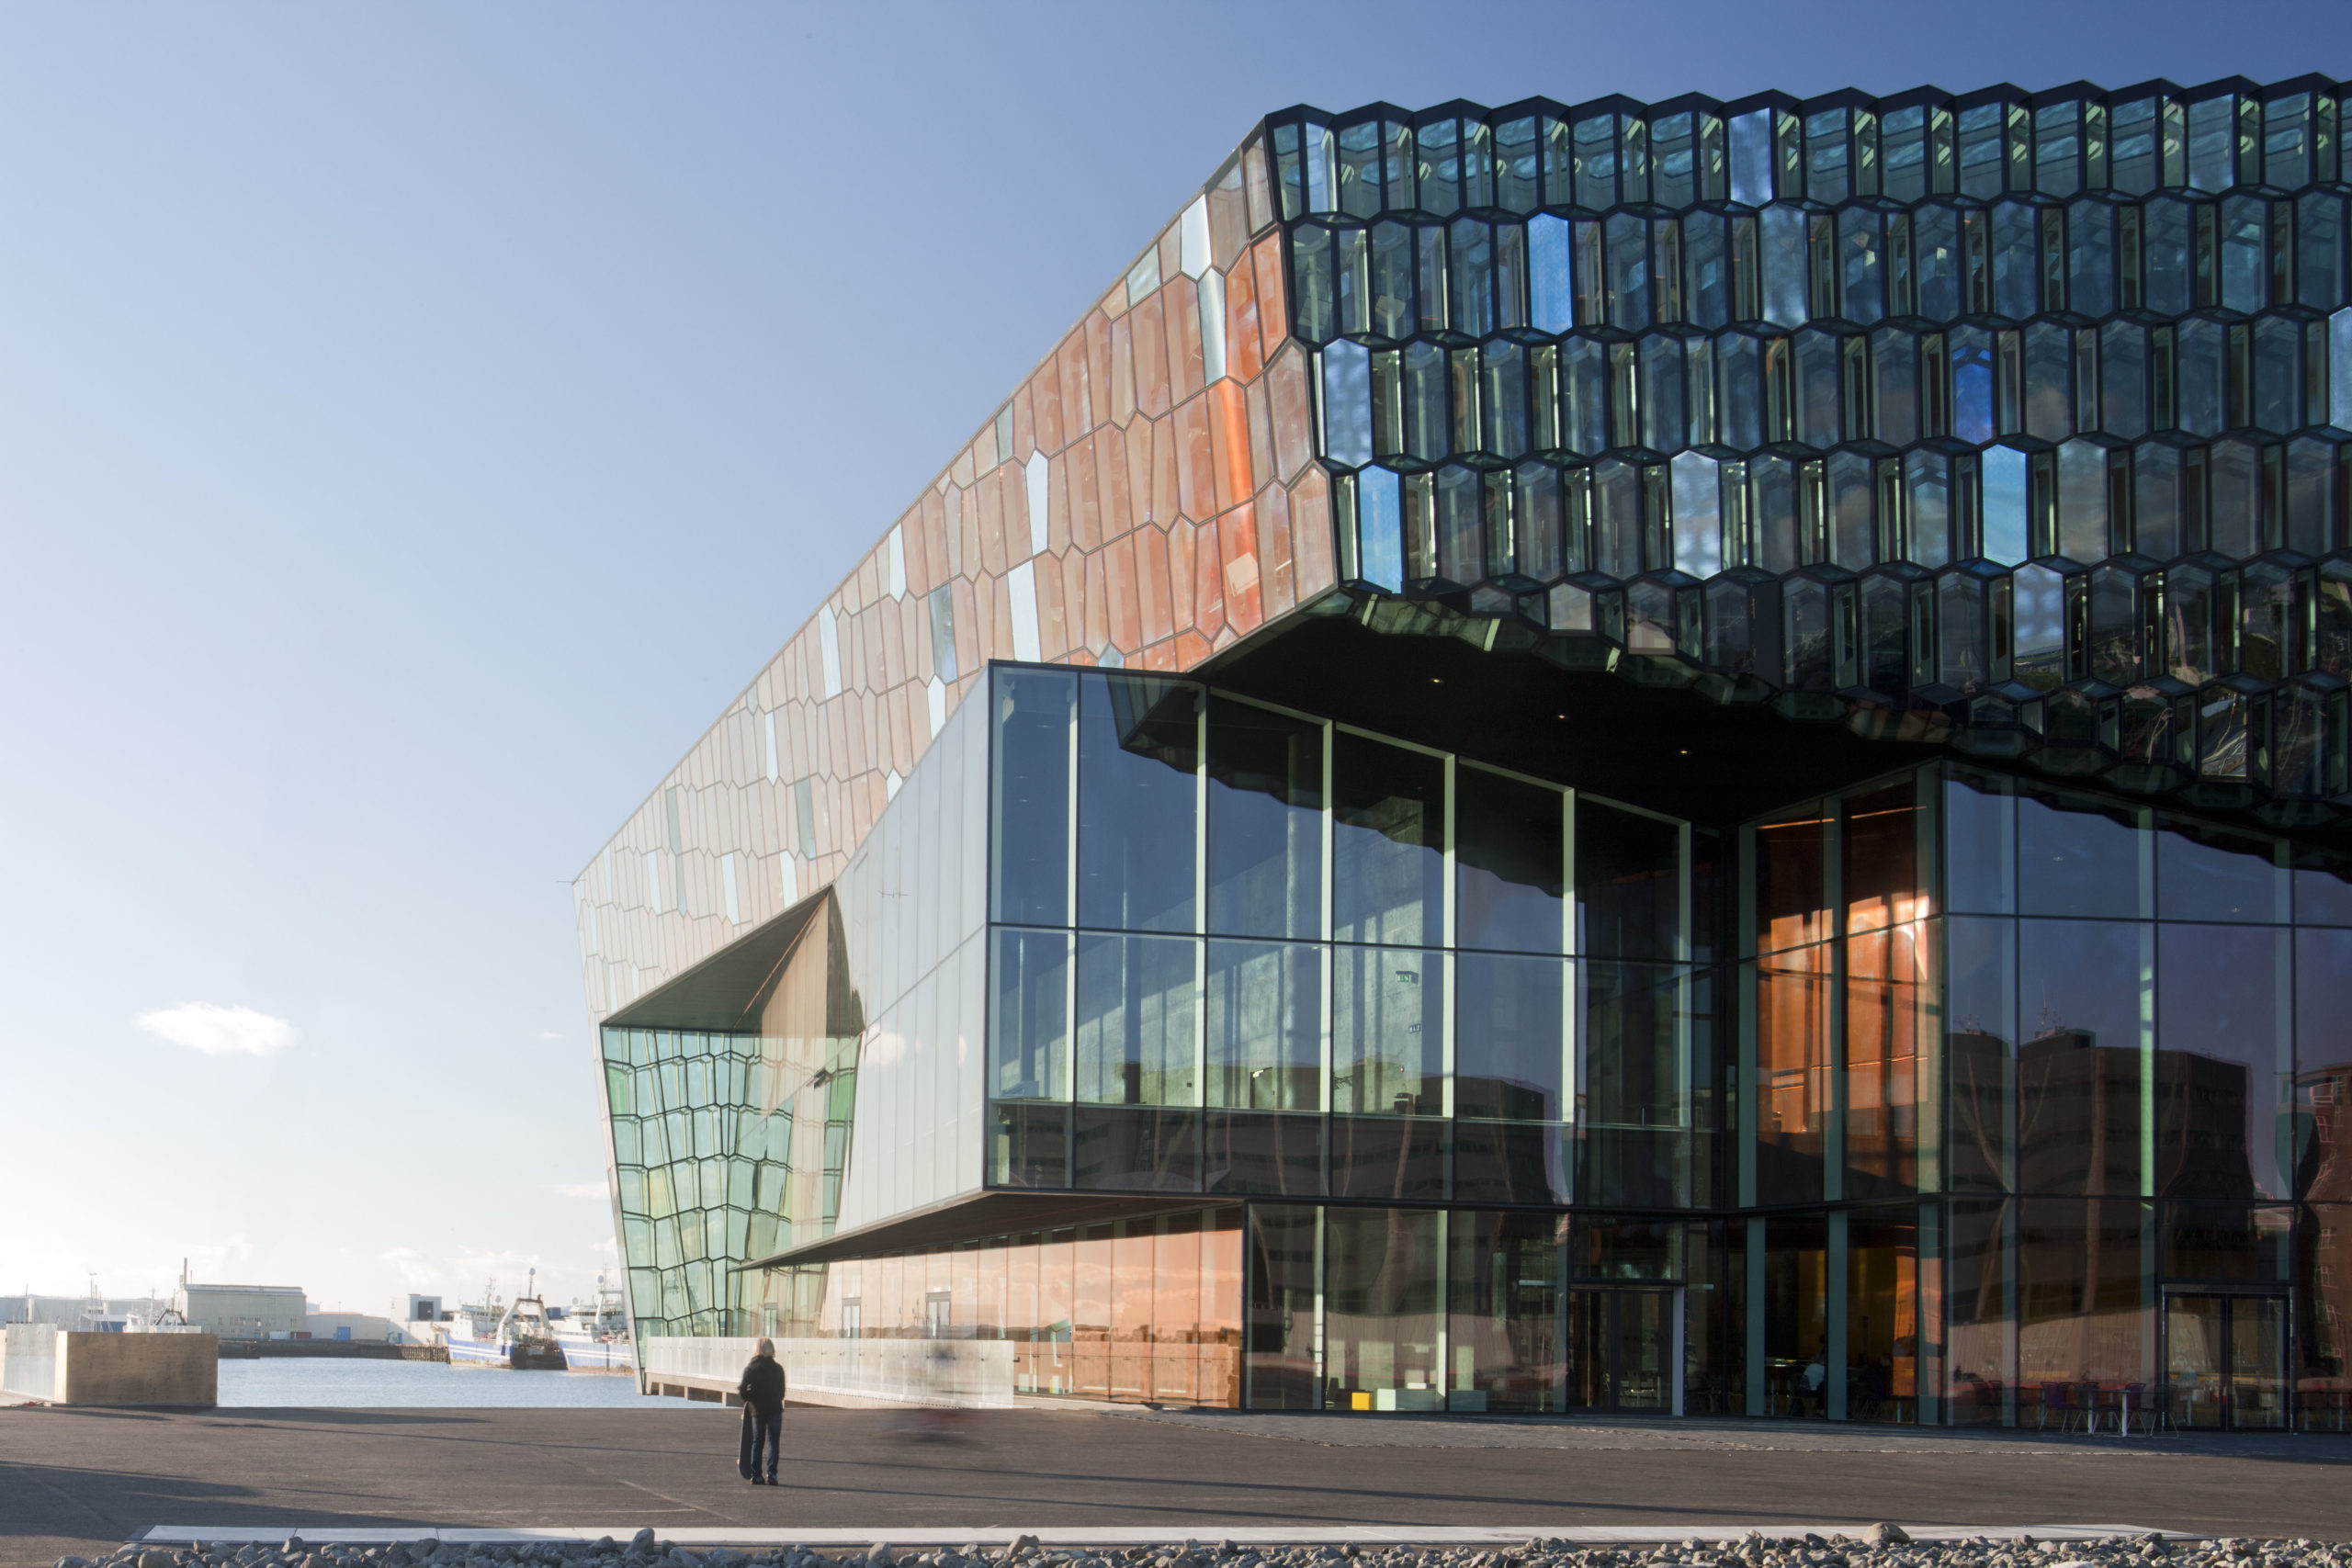 Architectural Details: The Crystalline Façades of Iceland's Harpa